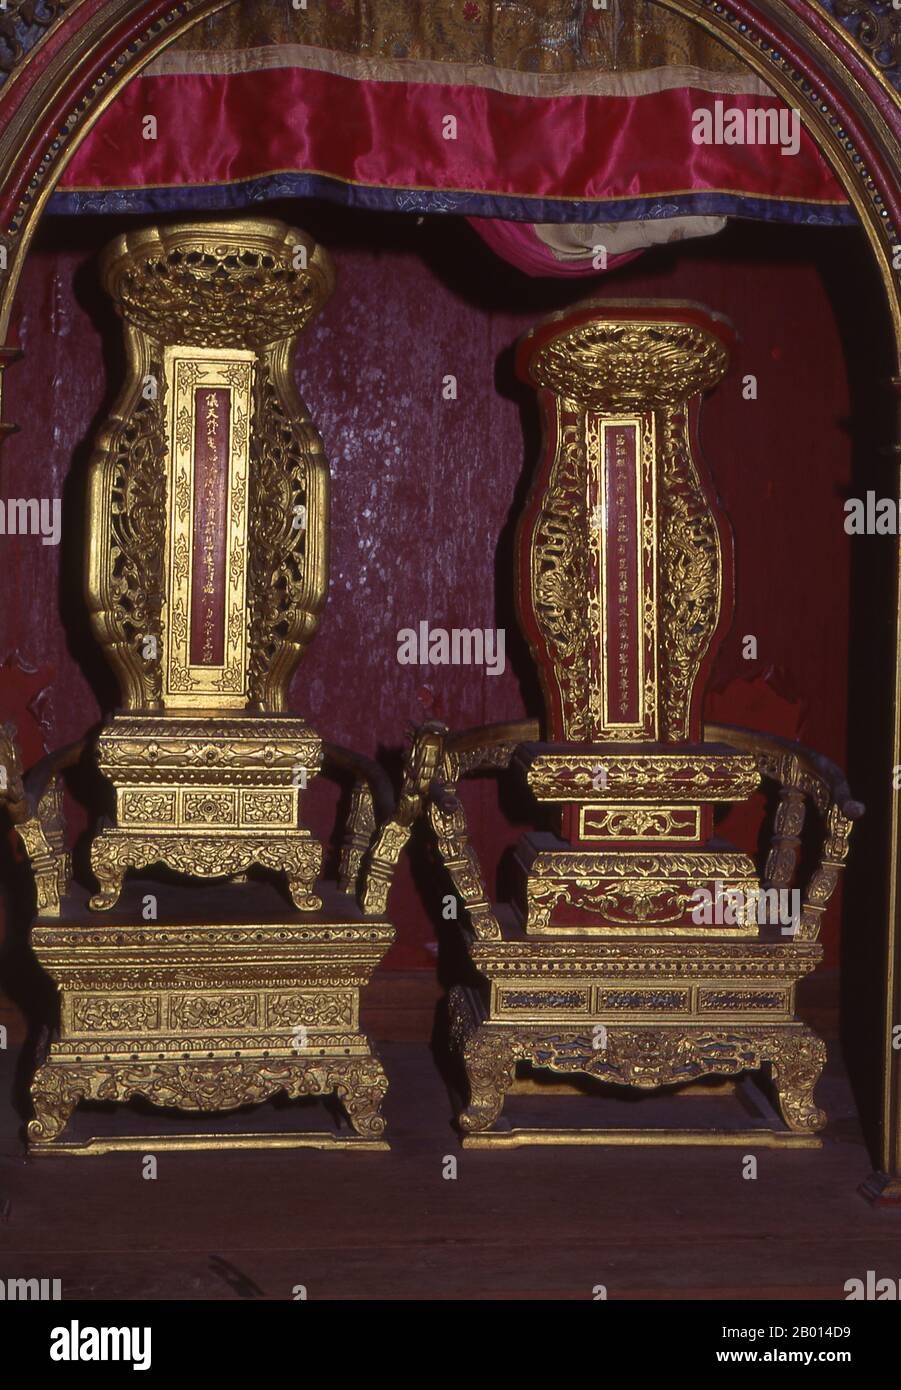 Vietnam: Ancestor tablets, Tomb of Emperor Thieu Tri, Hue.  Nguyễn Phúc Miên Tông (6 June 1807 – 4 November 1847) was the third emperor of the Vietnamese Nguyễn Dynasty taking the era name of Thiệu Trị. He was the eldest son of Emperor Minh Mạng, and reigned from 14 February 1841 until his death on 4 November 1847.  Emperor Thiệu Trị was much like his father Minh Mạng and carried on his conservative policies of isolationism and the entrenchment of Confucianism. Highly educated in the Confucian tradition, Thiệu Trị had some curiosity about the West, but like his father was very suspicious. Stock Photo